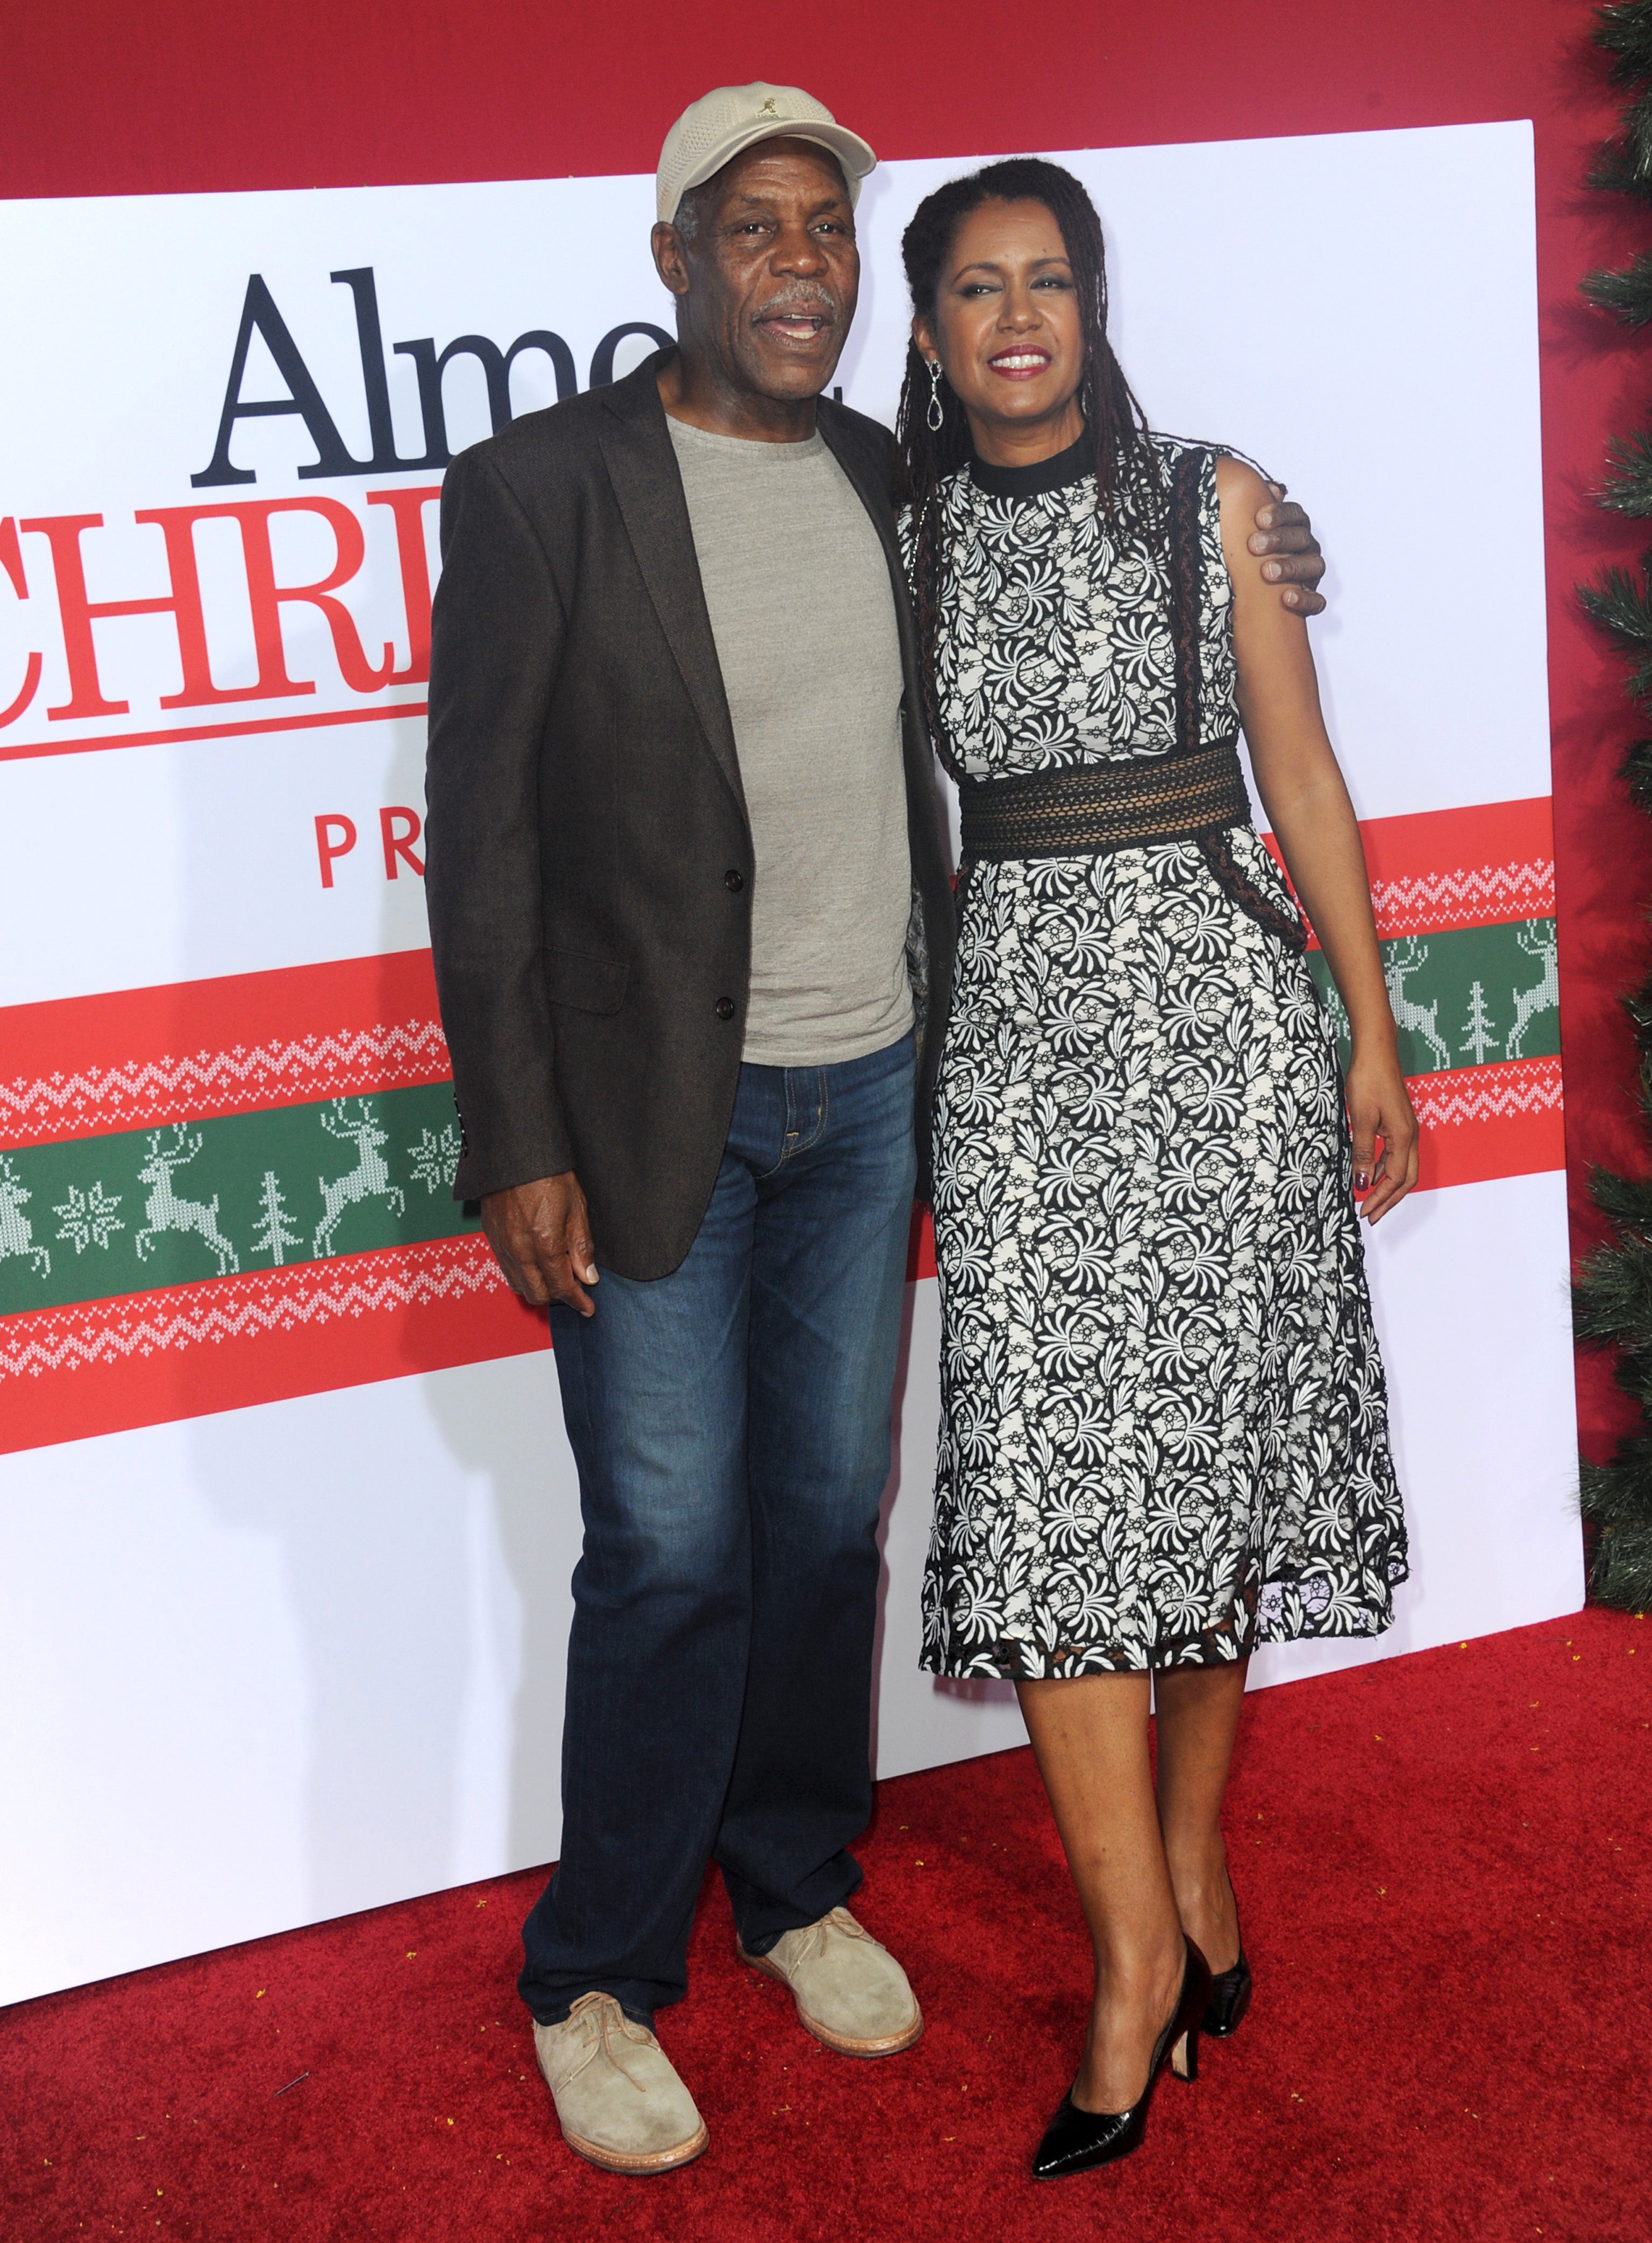 Celebs Get Festive at the 'Almost Christmas' Premiere 
